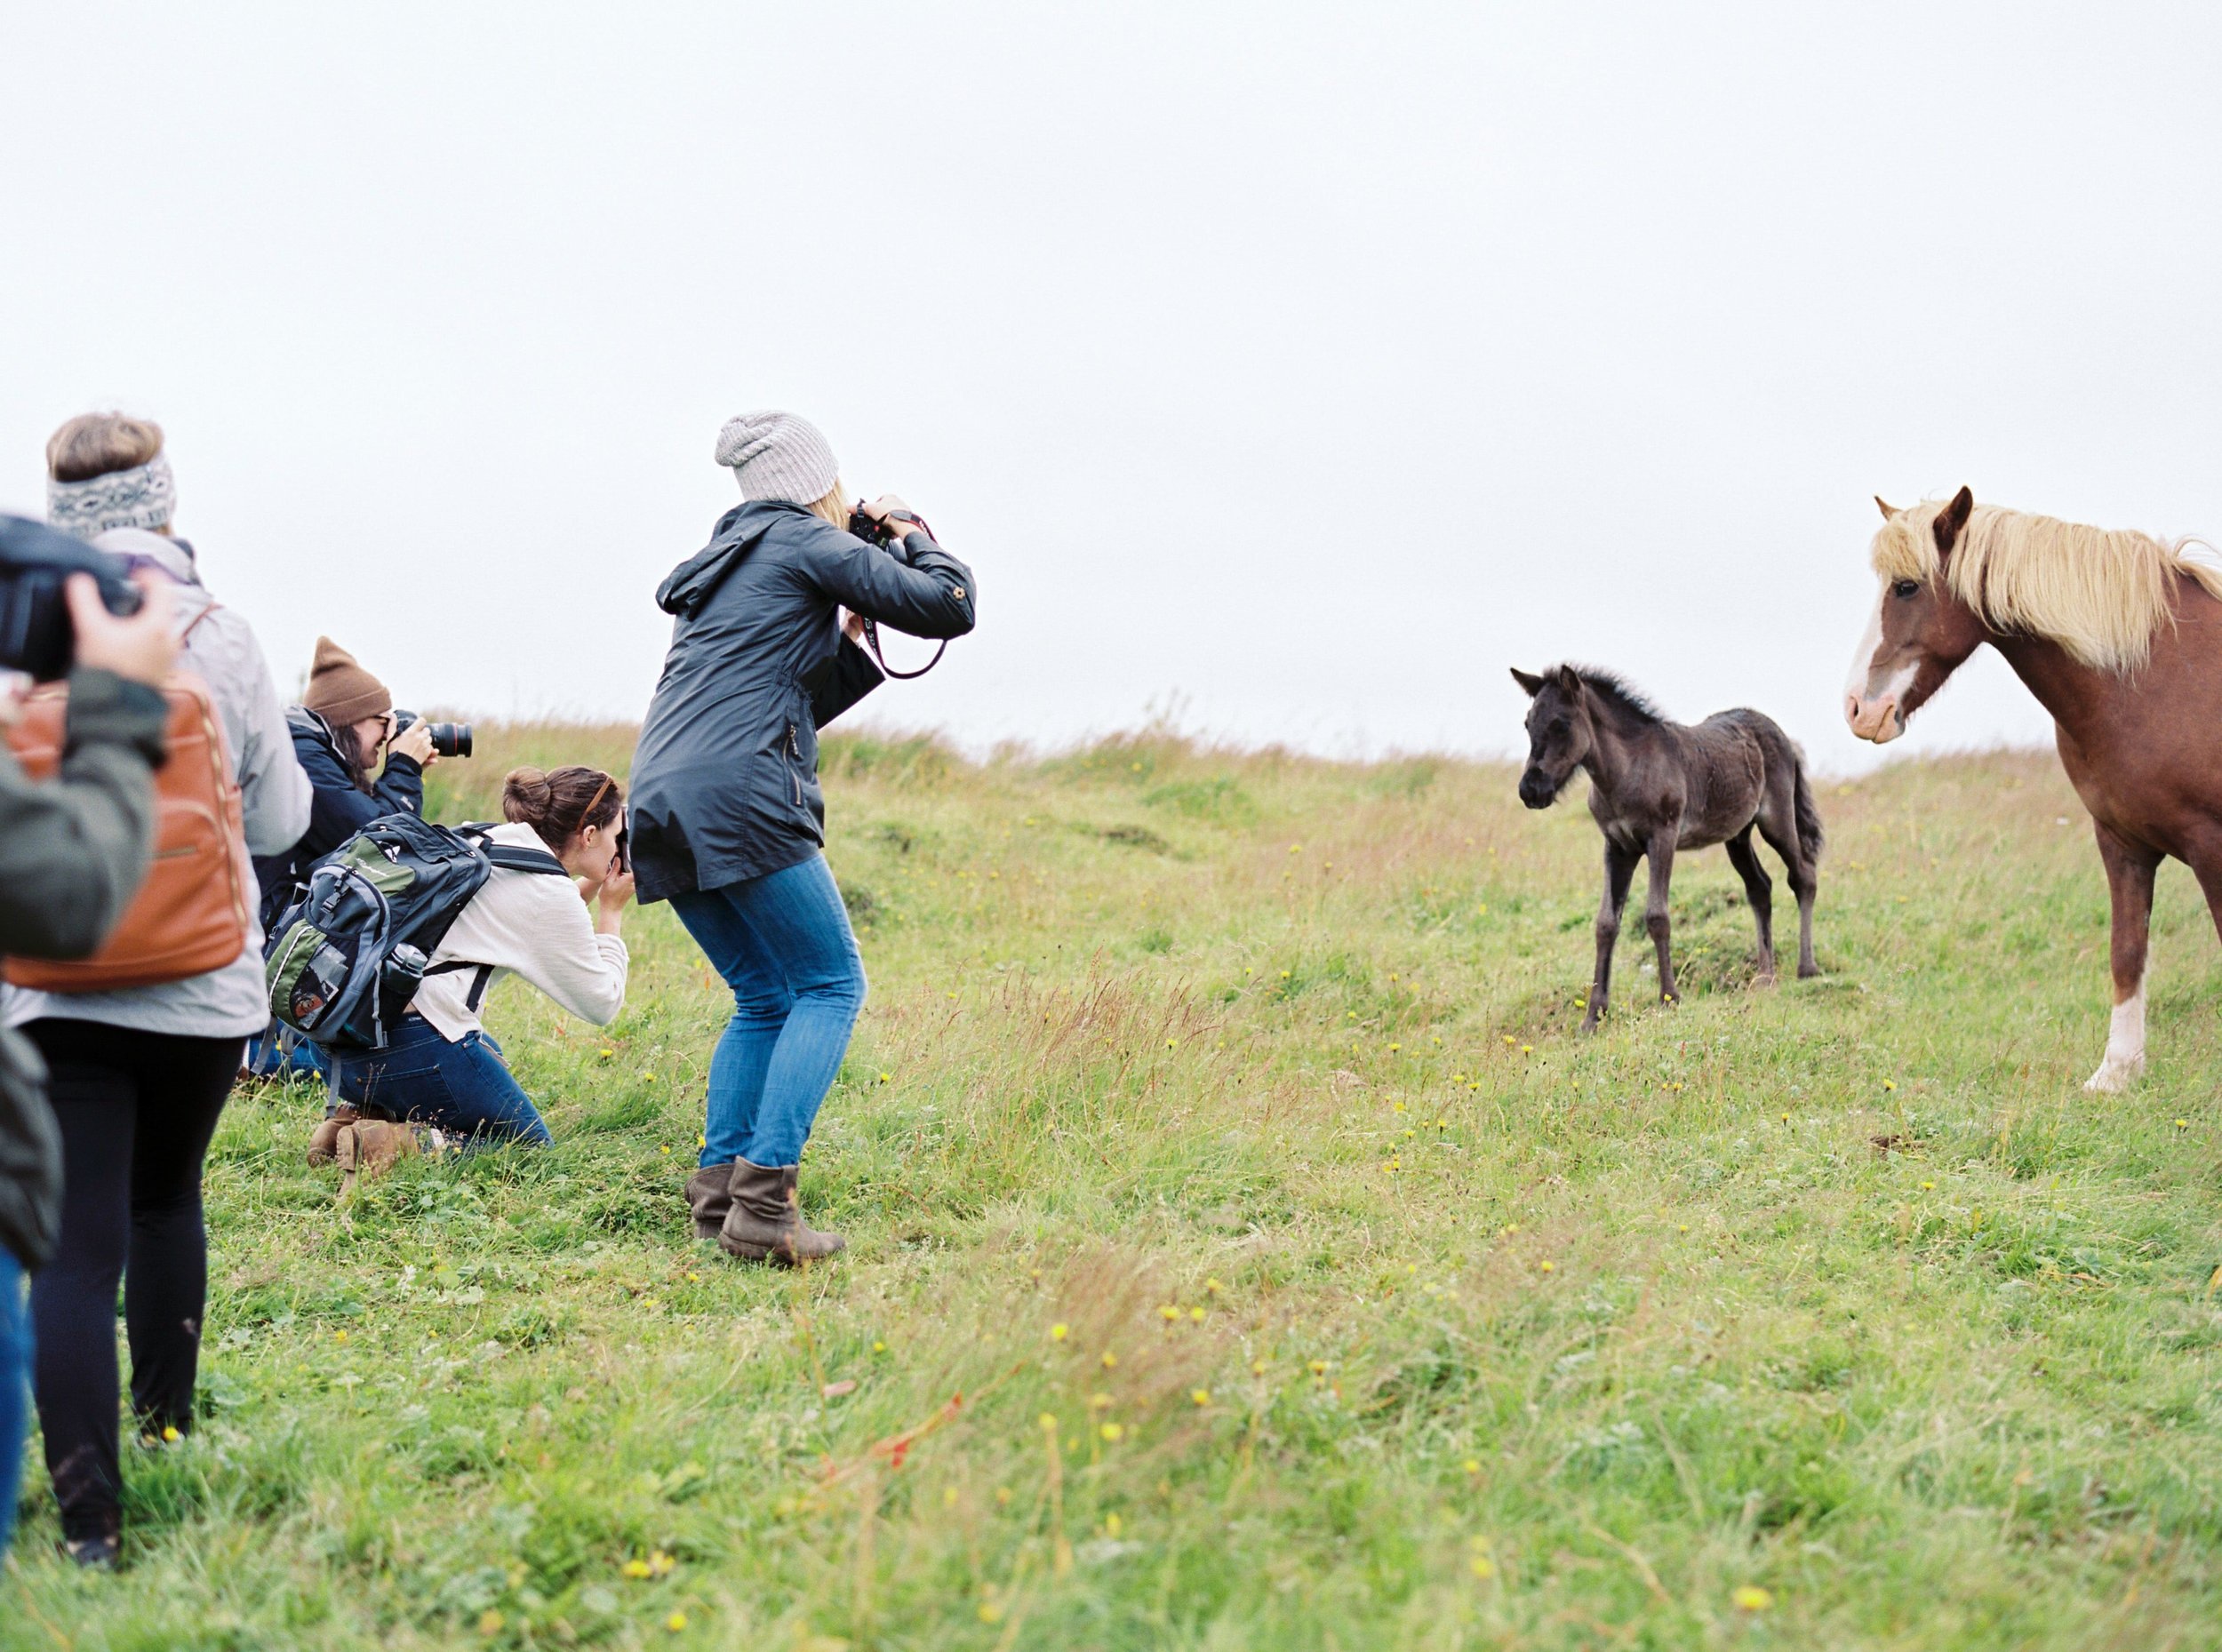 Horses in Iceland by Kristin Sweeting now on Cottage Hill73.jpg